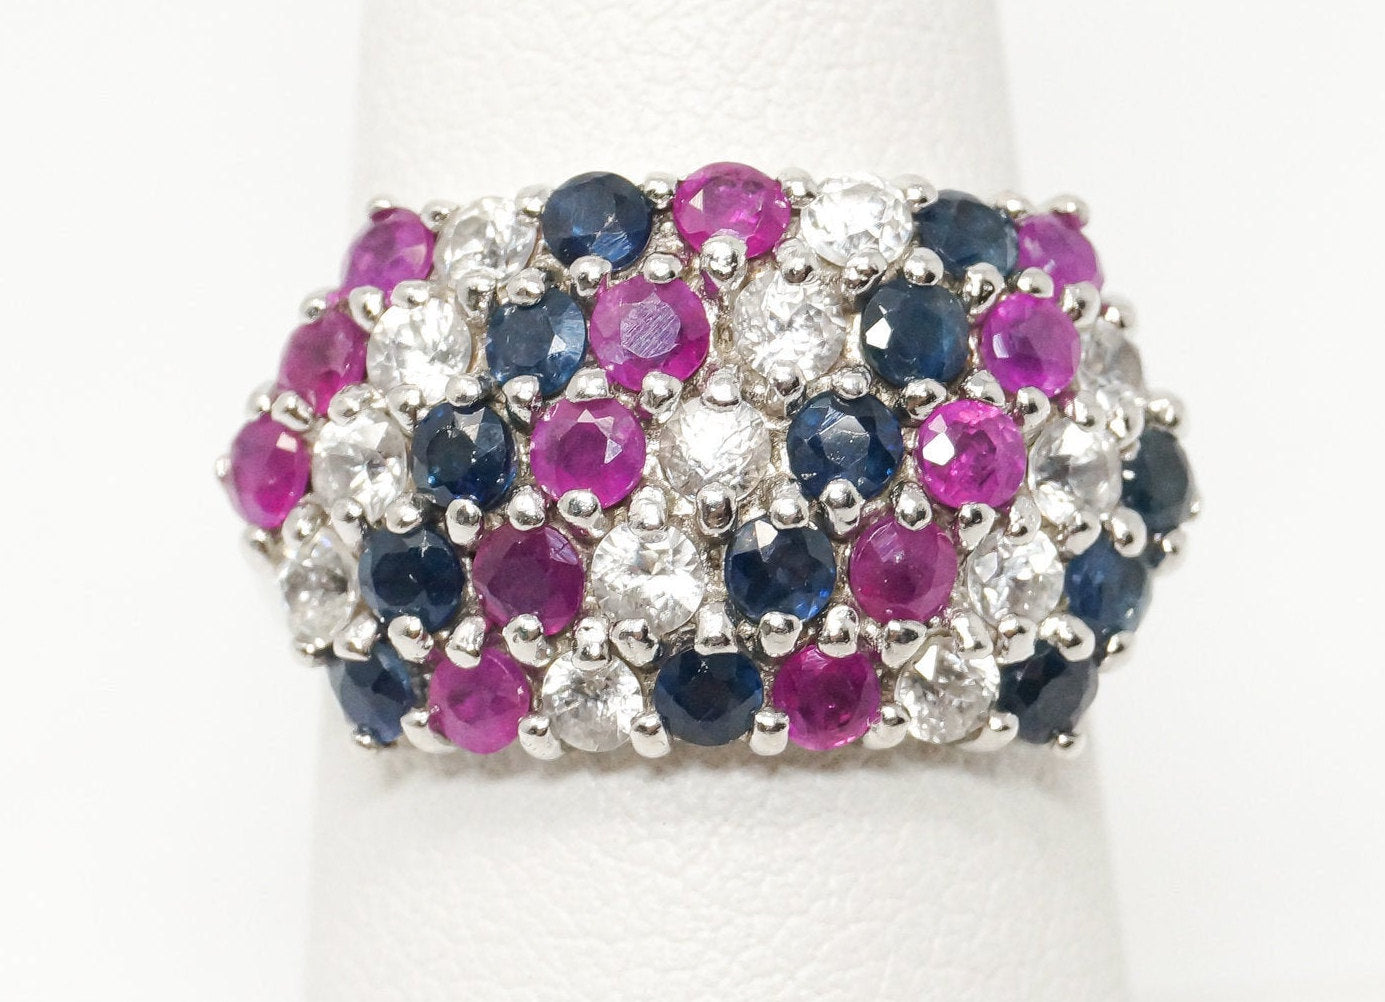 Vintage Art Deco Ruby Sapphire Cubic Zirconia Sterling Silver Ring - Size 7.25